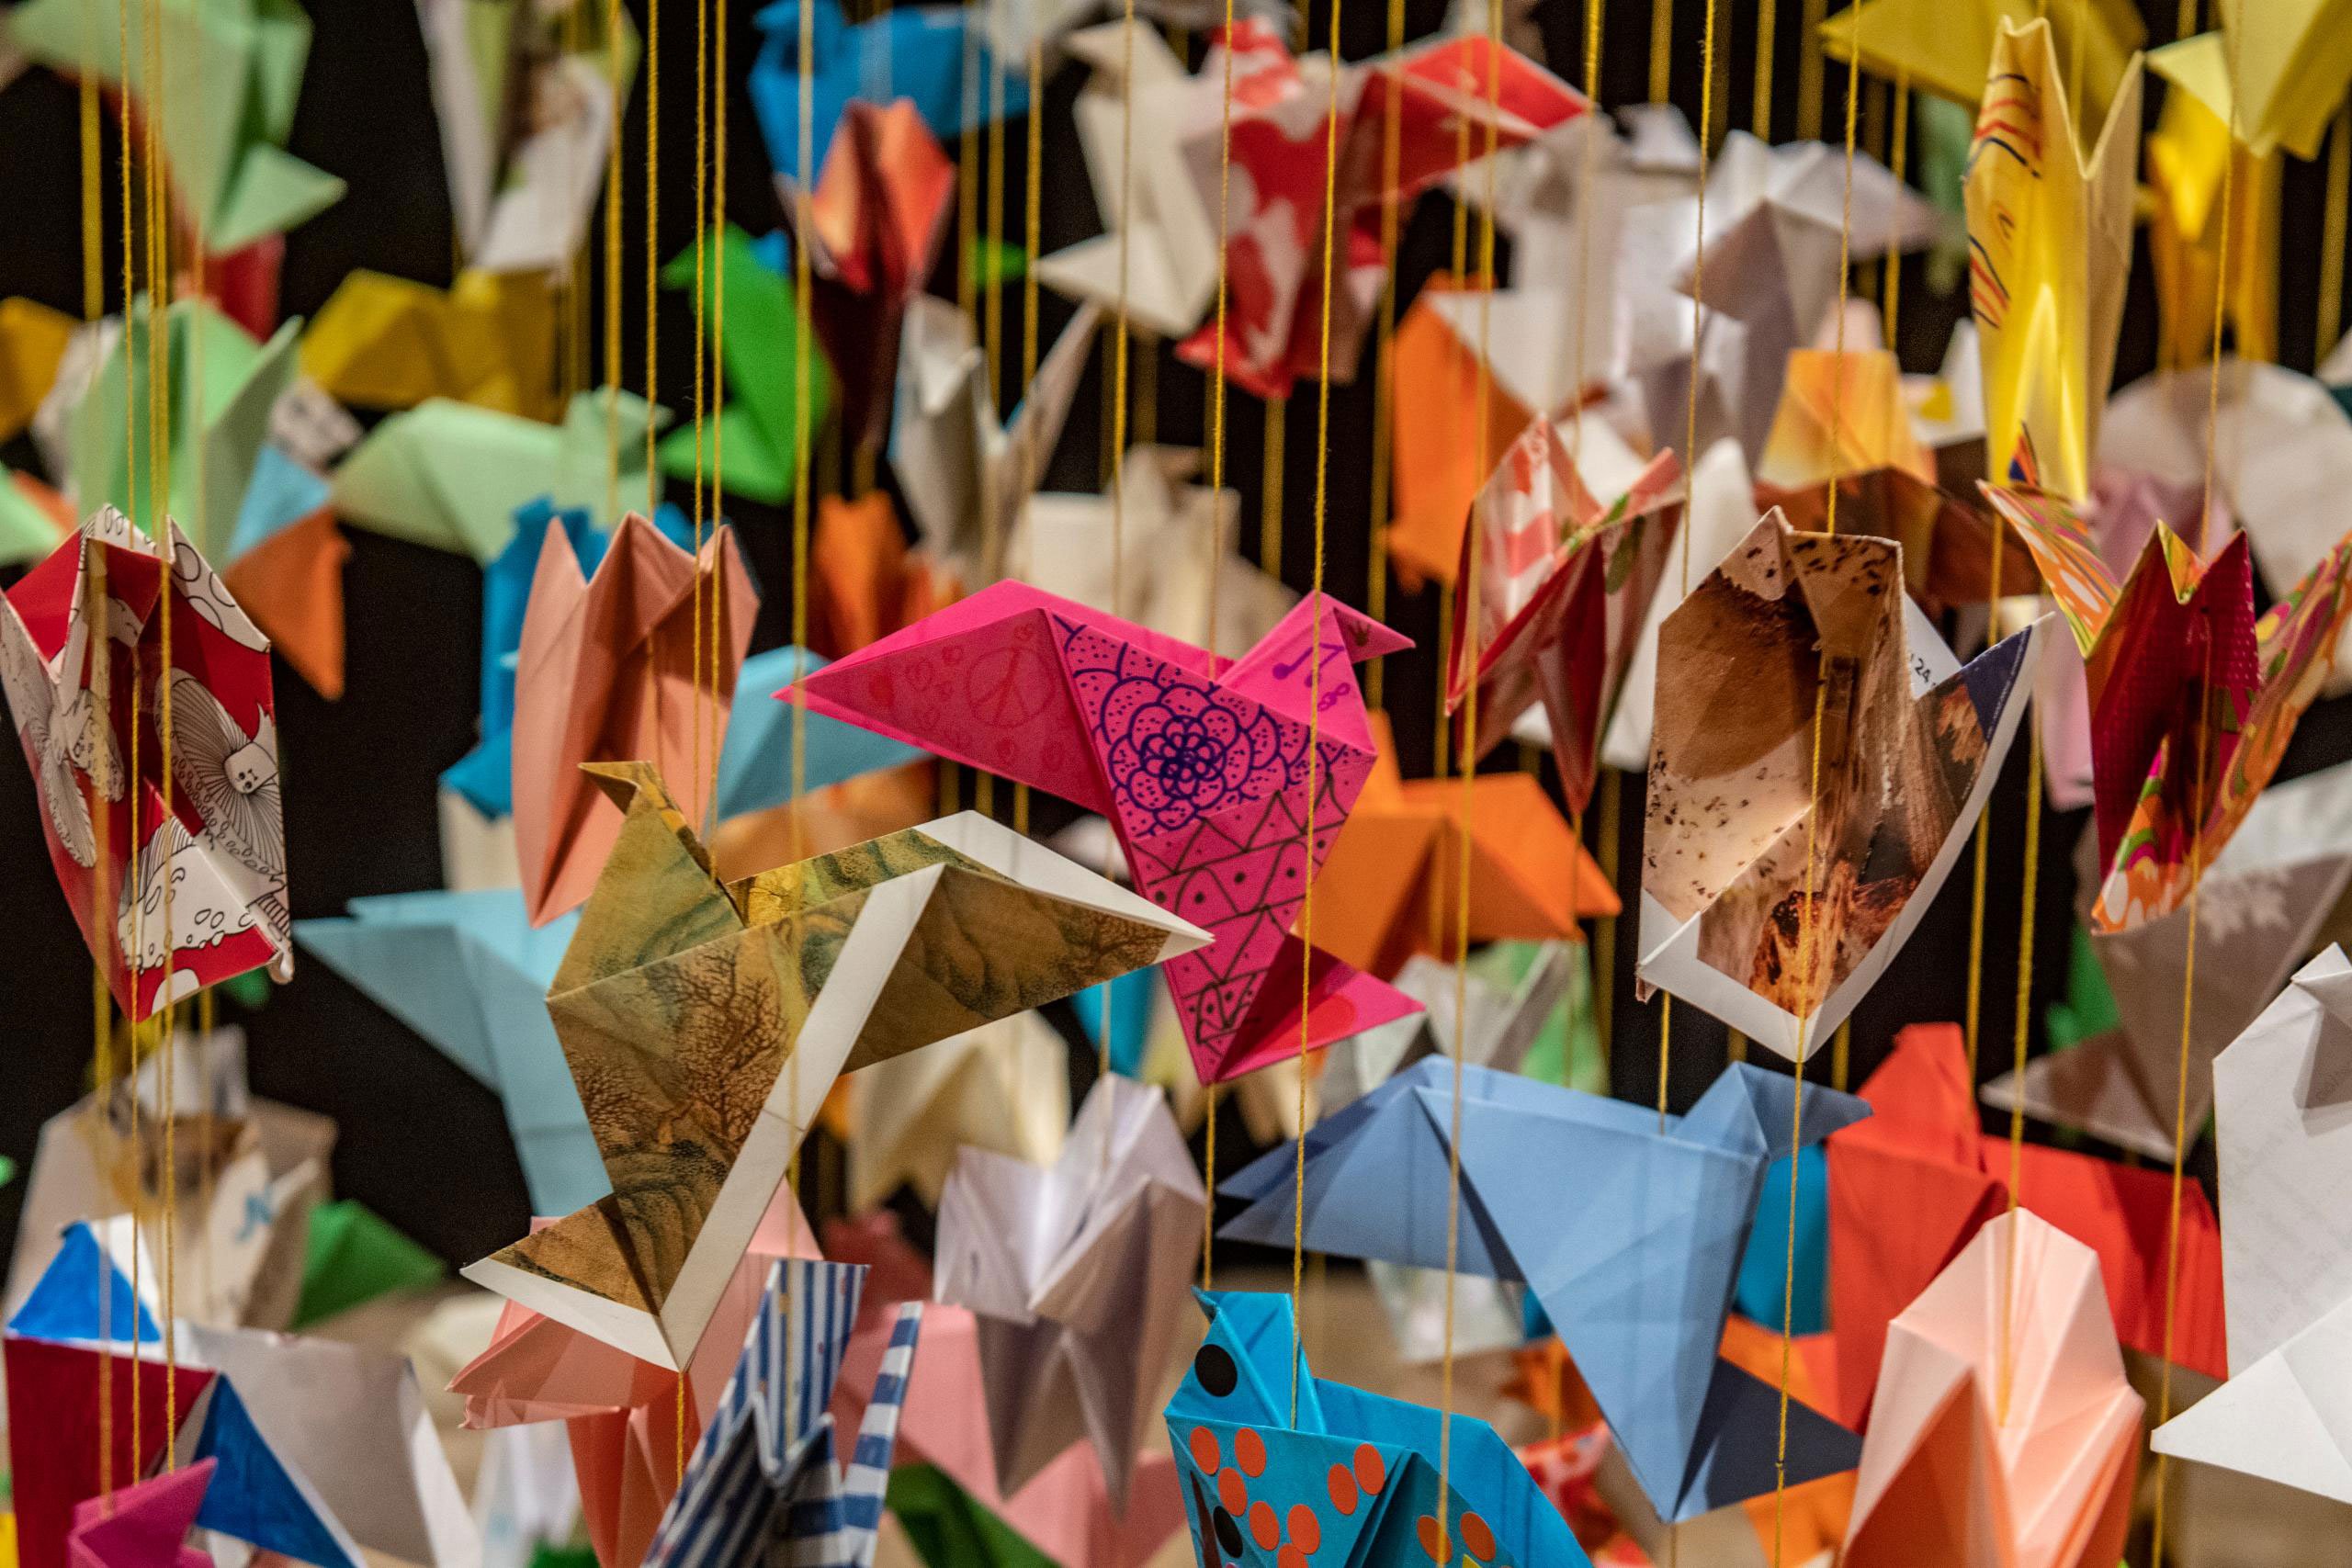 Origami for Life by Charles Kaisin. "Magnae Chartae" installation at Homo Faber by Michele de Lucchi. Photography by Simone Padovani © Michelangelo Foundation.